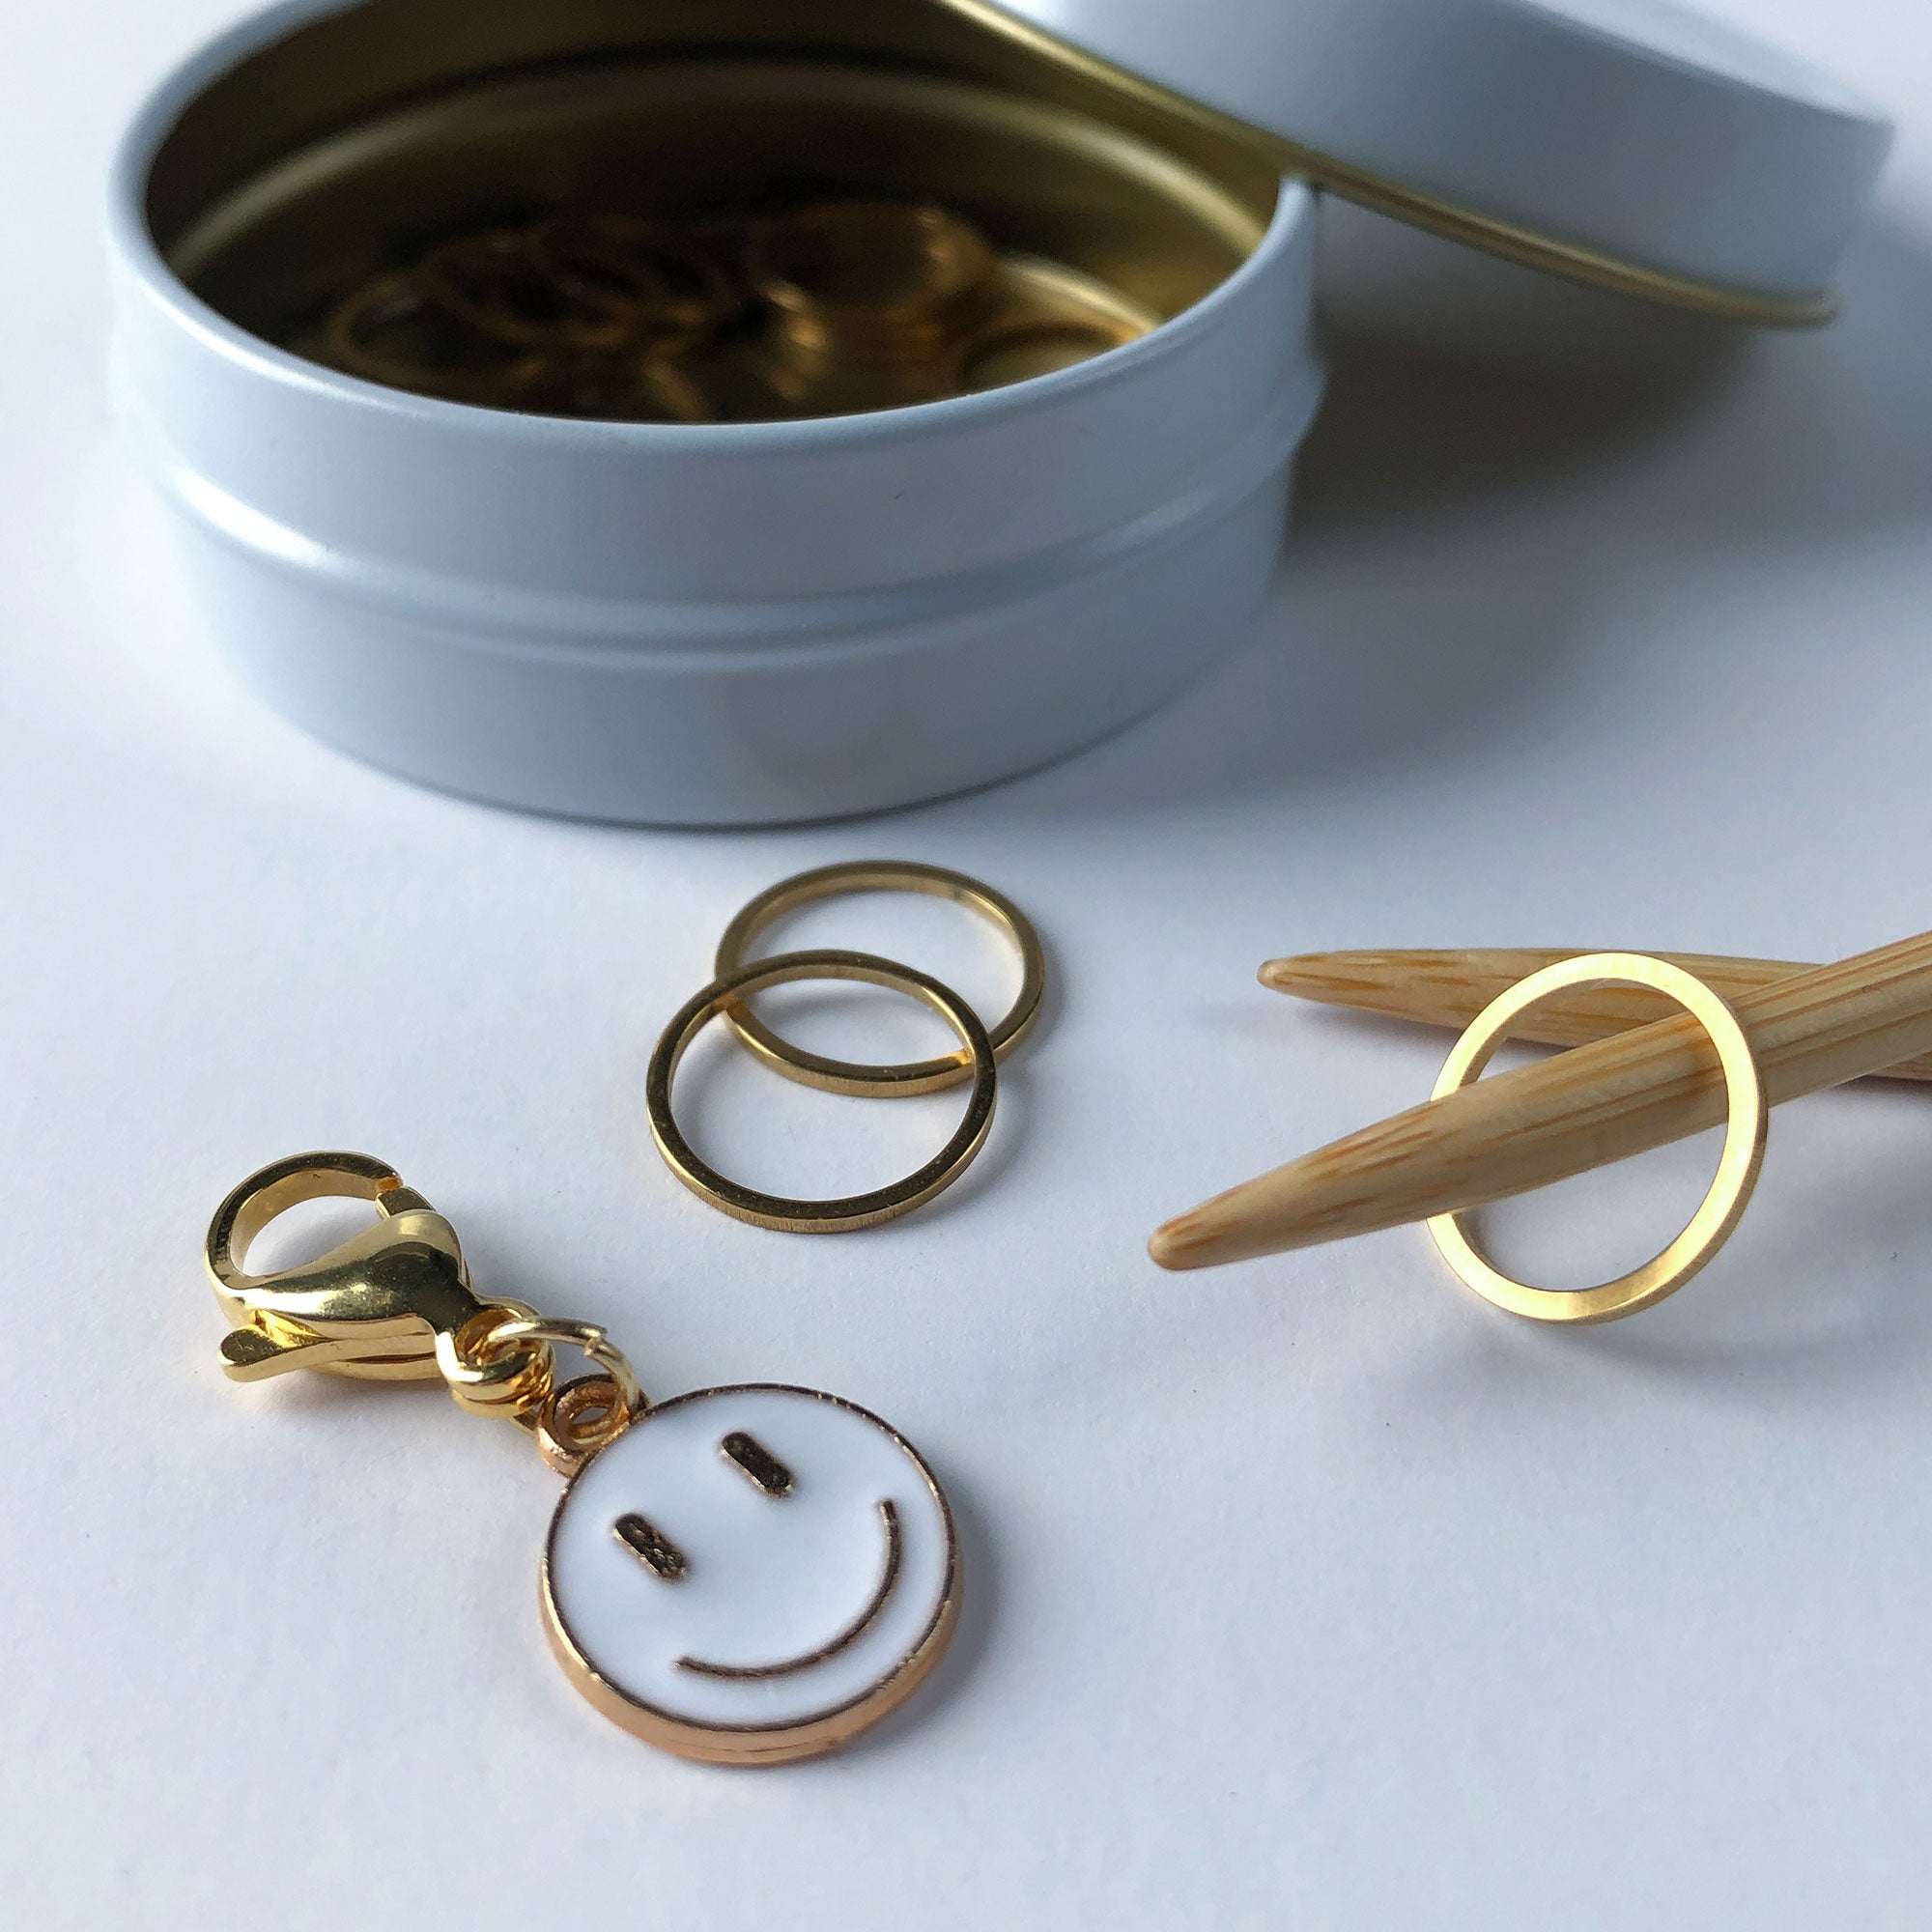 Fun and practical metal stitch marker set is a great knitter gift 